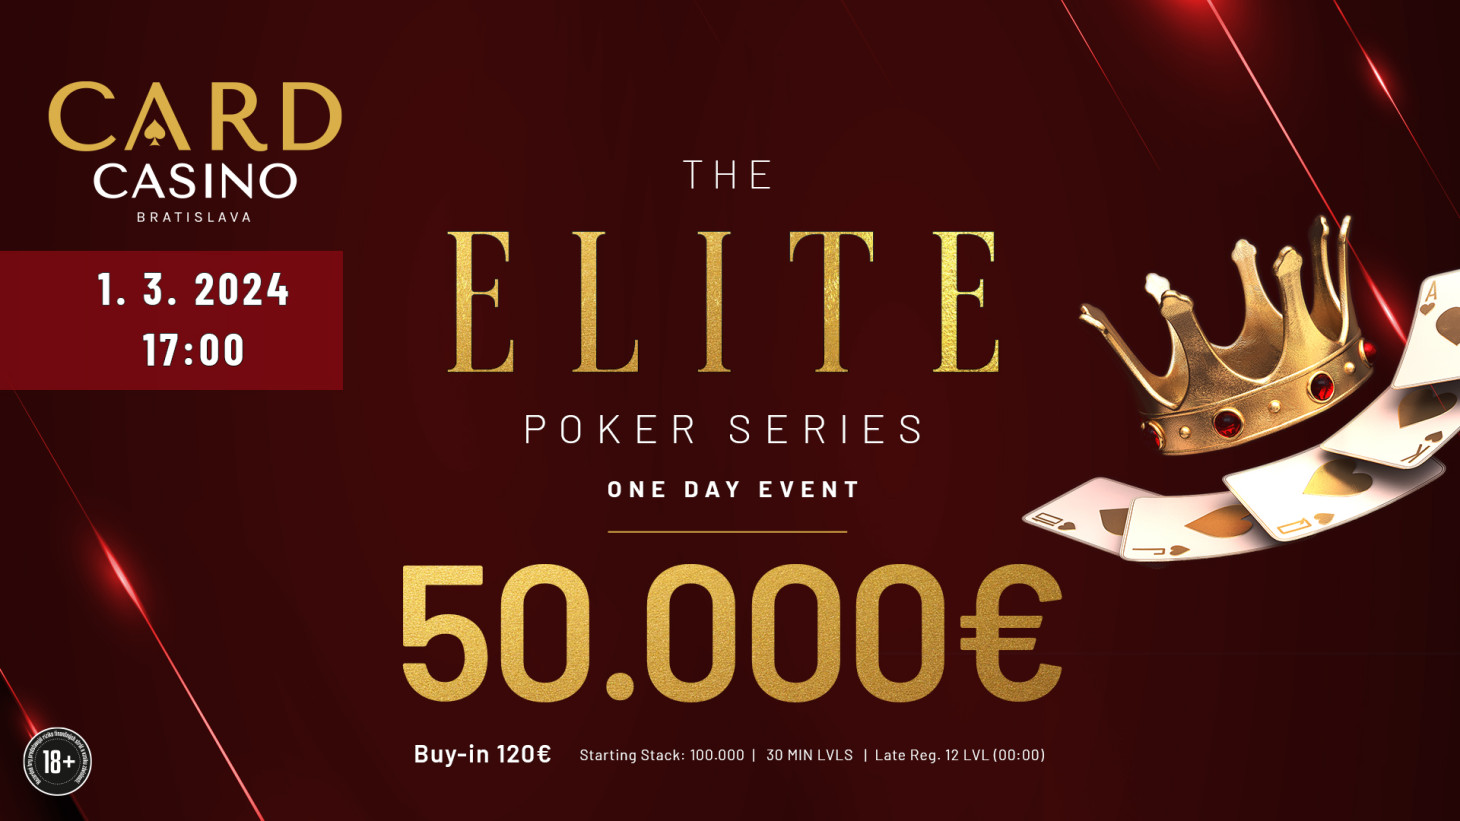 A packed week of poker with almost €100,000 GTD! Both Elite and Mystery Bounty are played